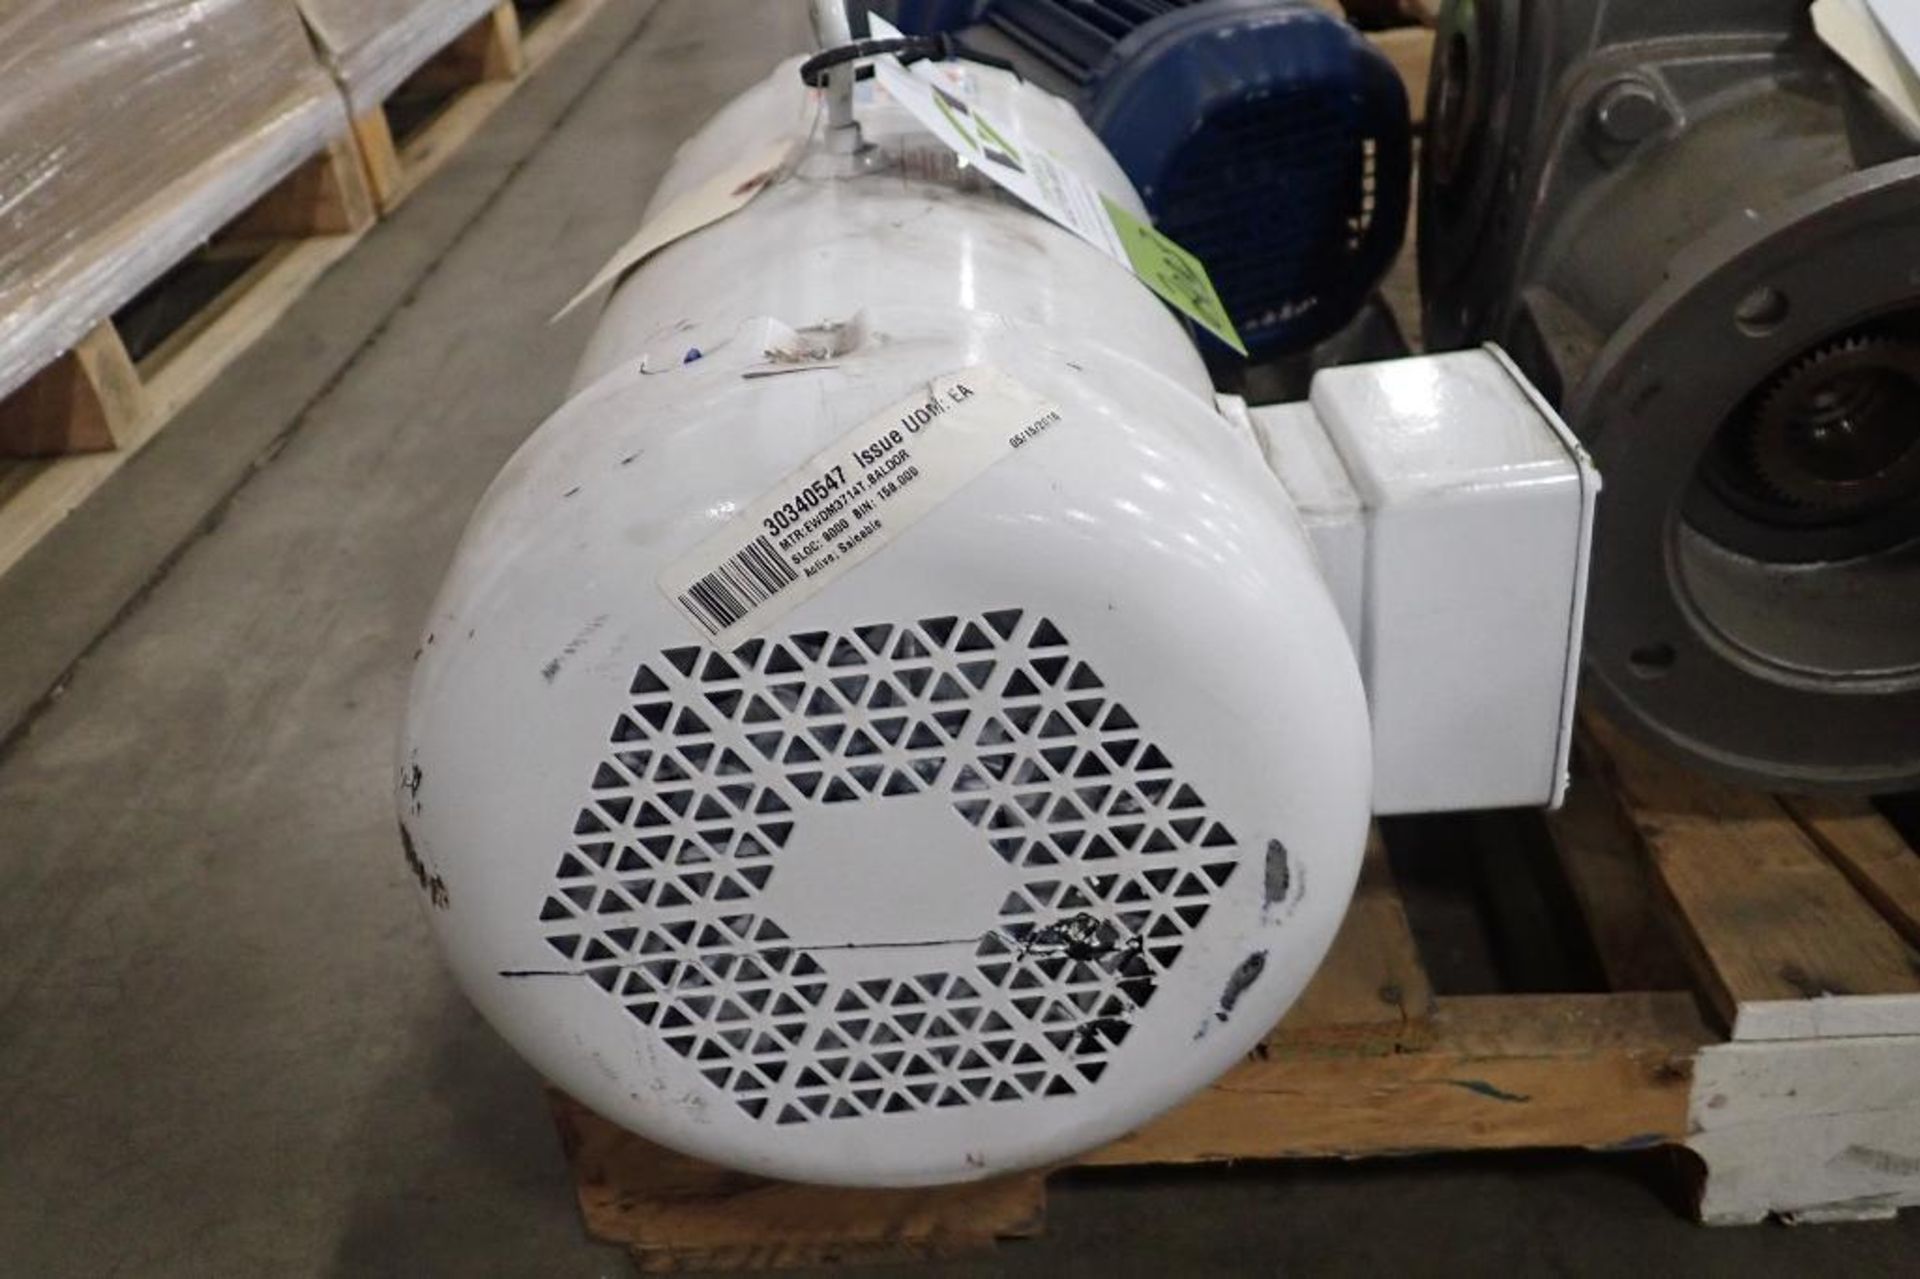 Baldor 10 hp electric motor. (See photos for additional specs). **Rigging Fee: $25** (Located in Eag - Image 3 of 4